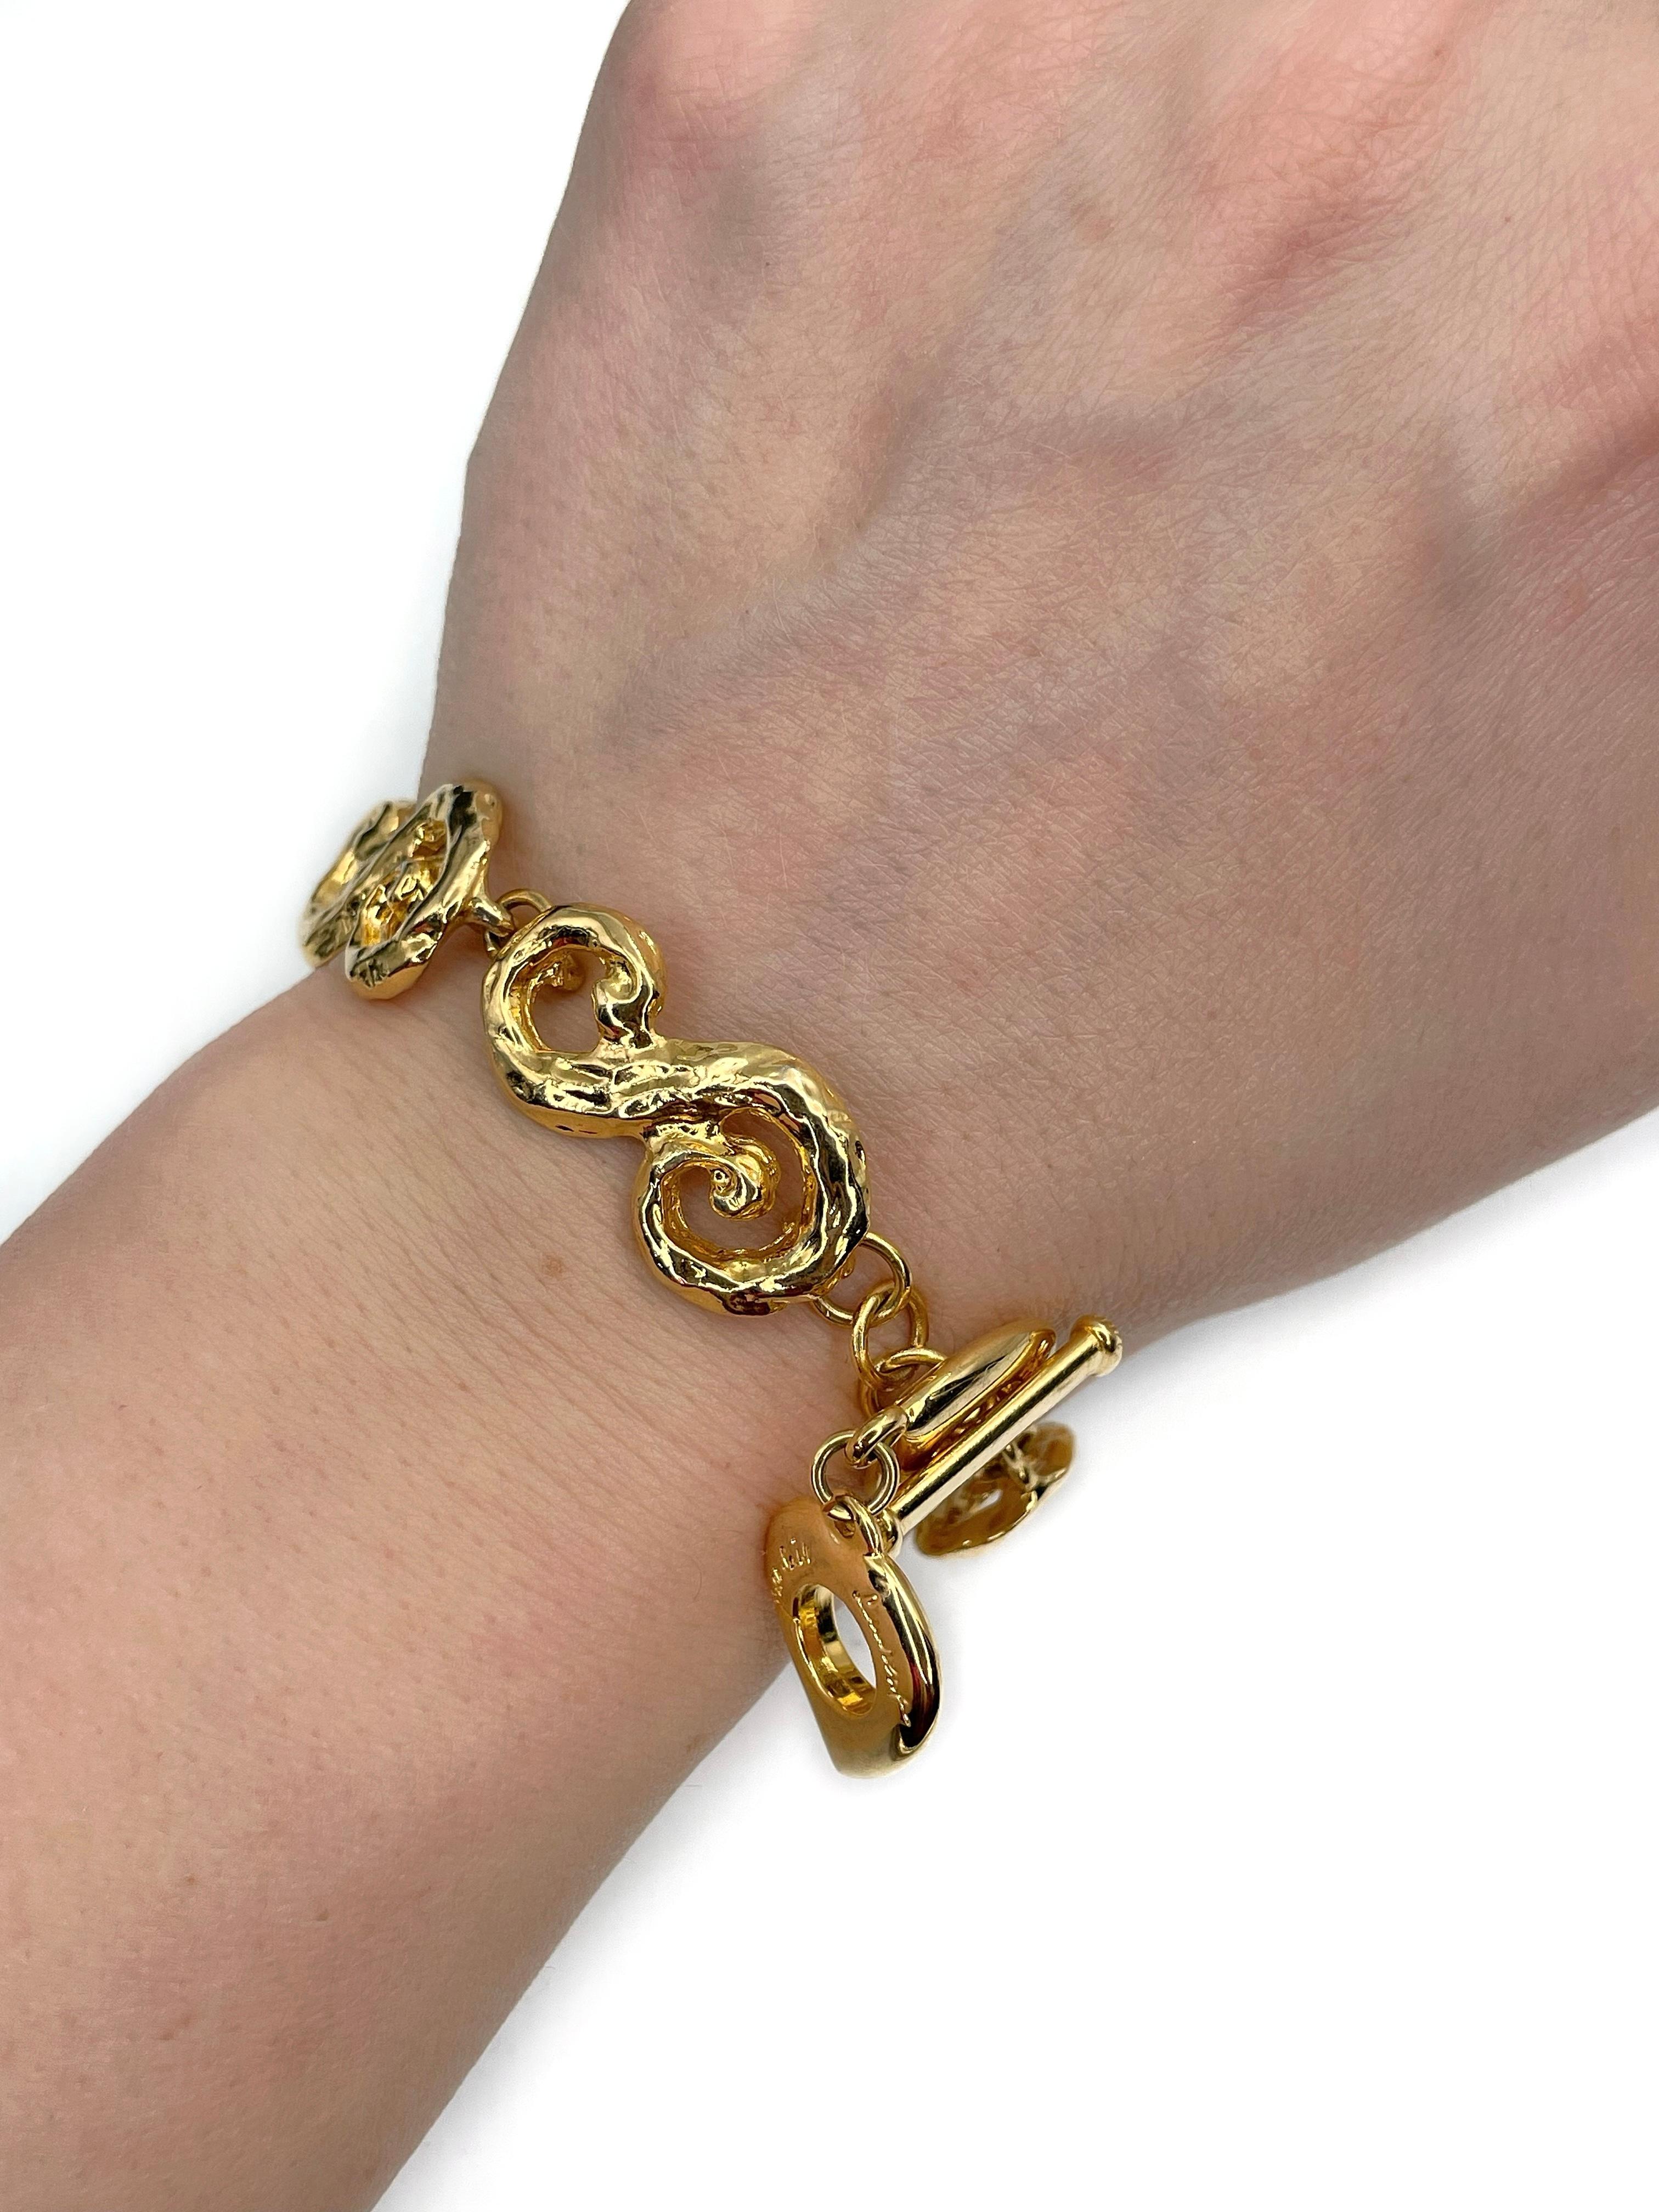 This is a gold tone arabesque pattern bracelet designed by YSL in 1980’s. The piece is gold plated. 

Signed: “Yves Saint Laurent” (shown in photos).

Adjustable toggle and loop closure.

Adjusts to 17cm and 19.5cm wrists
Whole bracelet length: